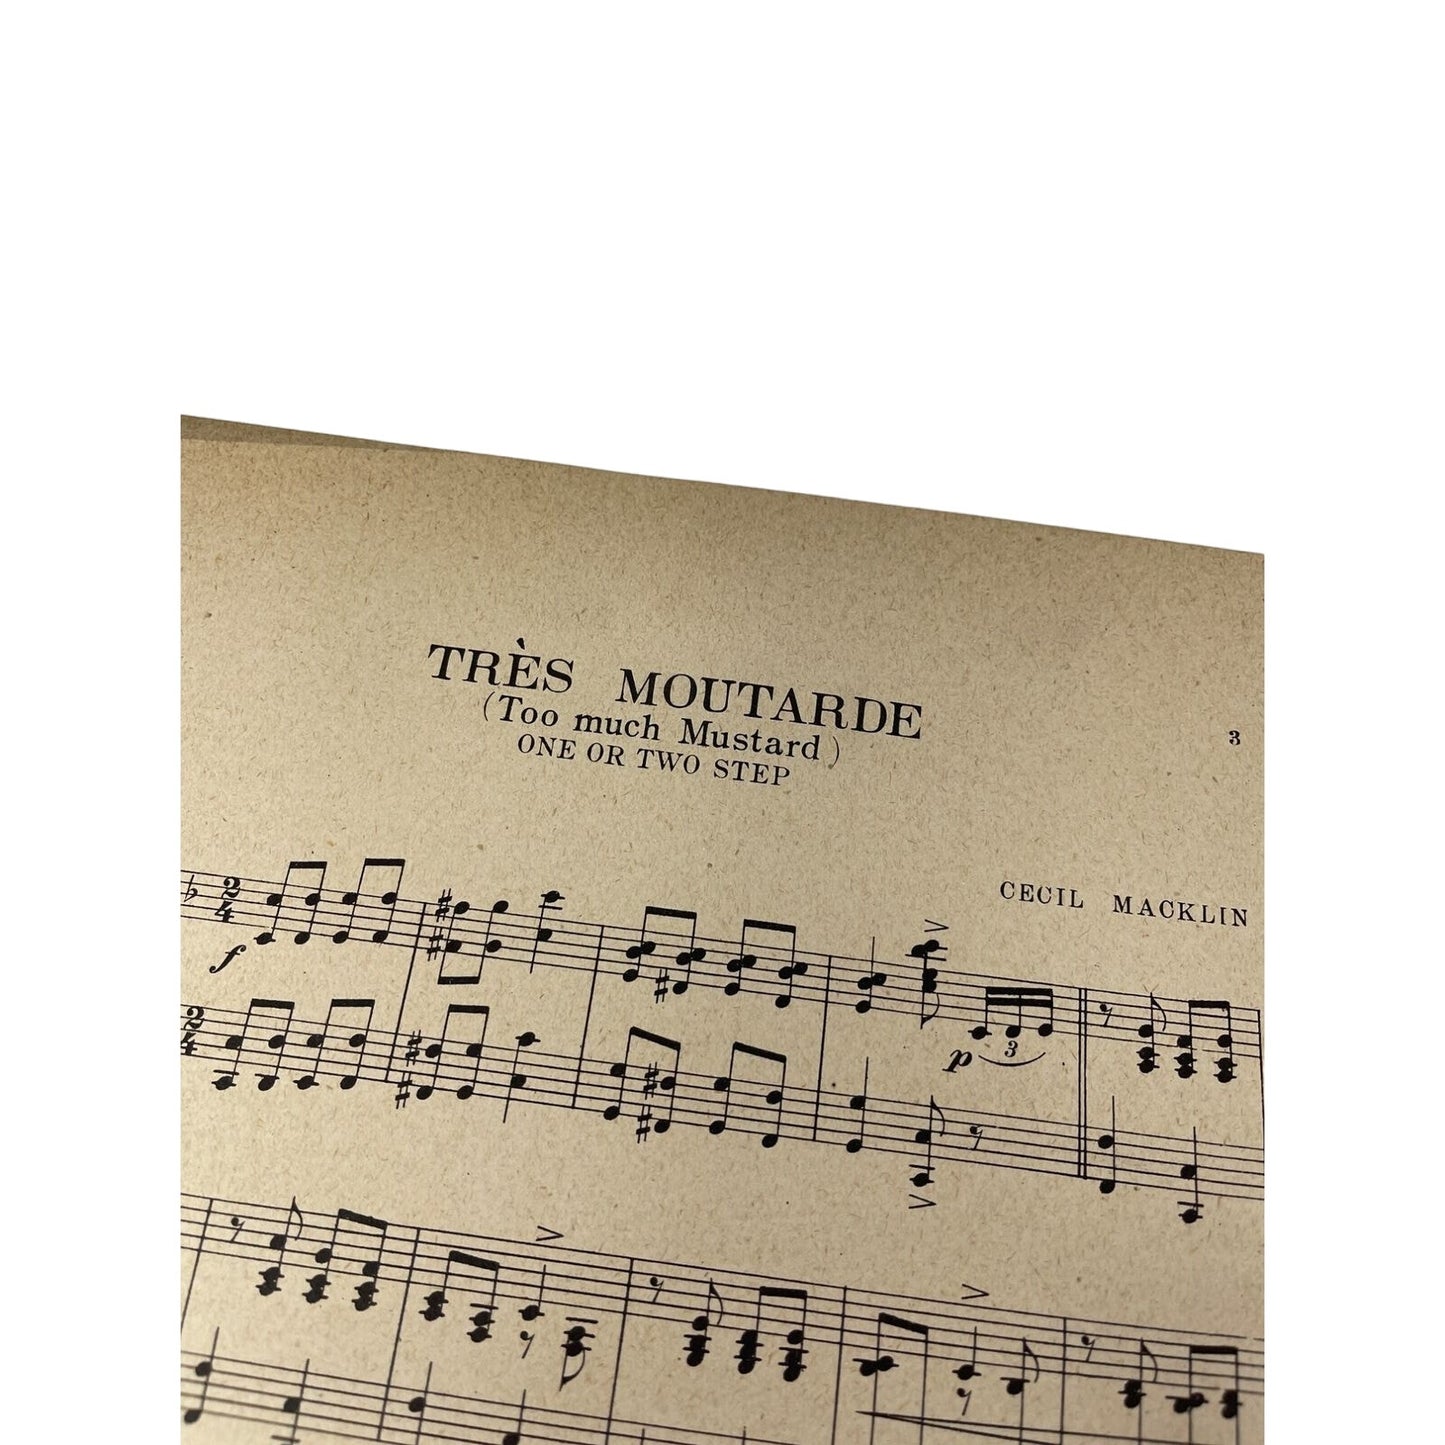 1911 Tres Moutarde Sheet Music One Step Two Step Tango Cecil Macklin